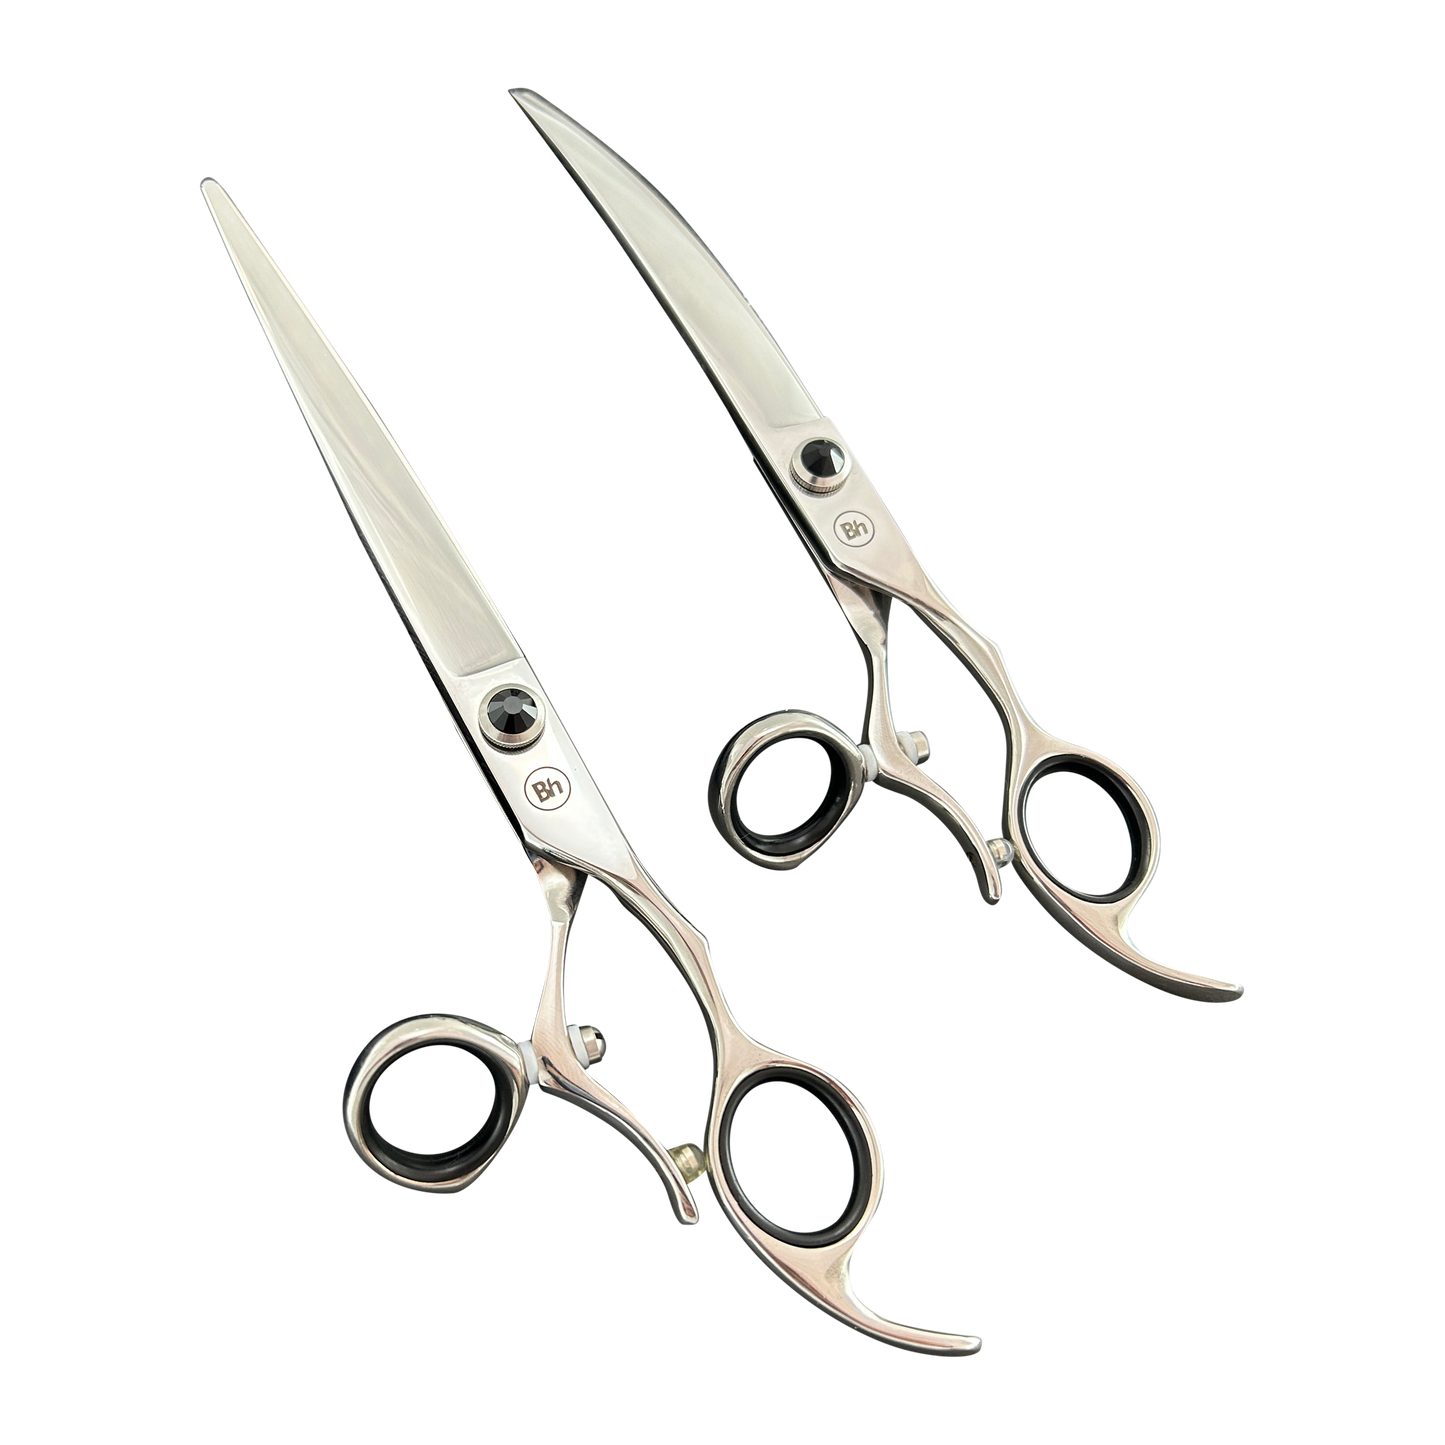 Onyx - Swivel Set of Straight and Curved Shears